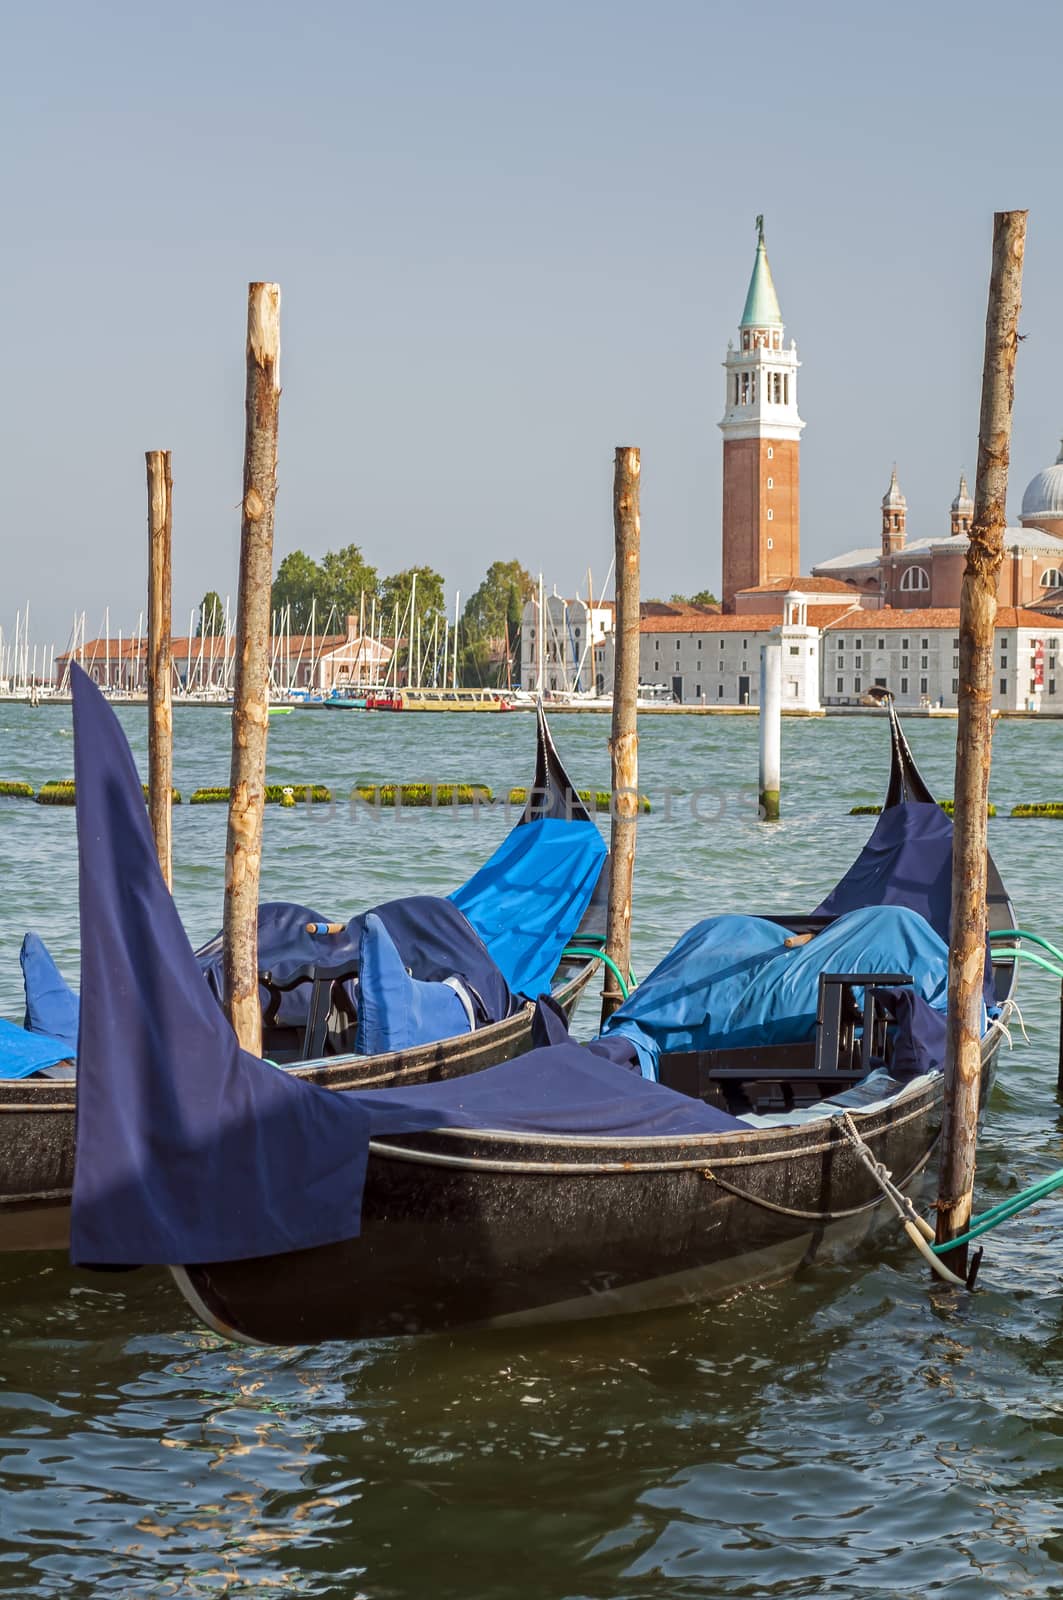 Gondola in Venice, Italy, with St George Island in the background.